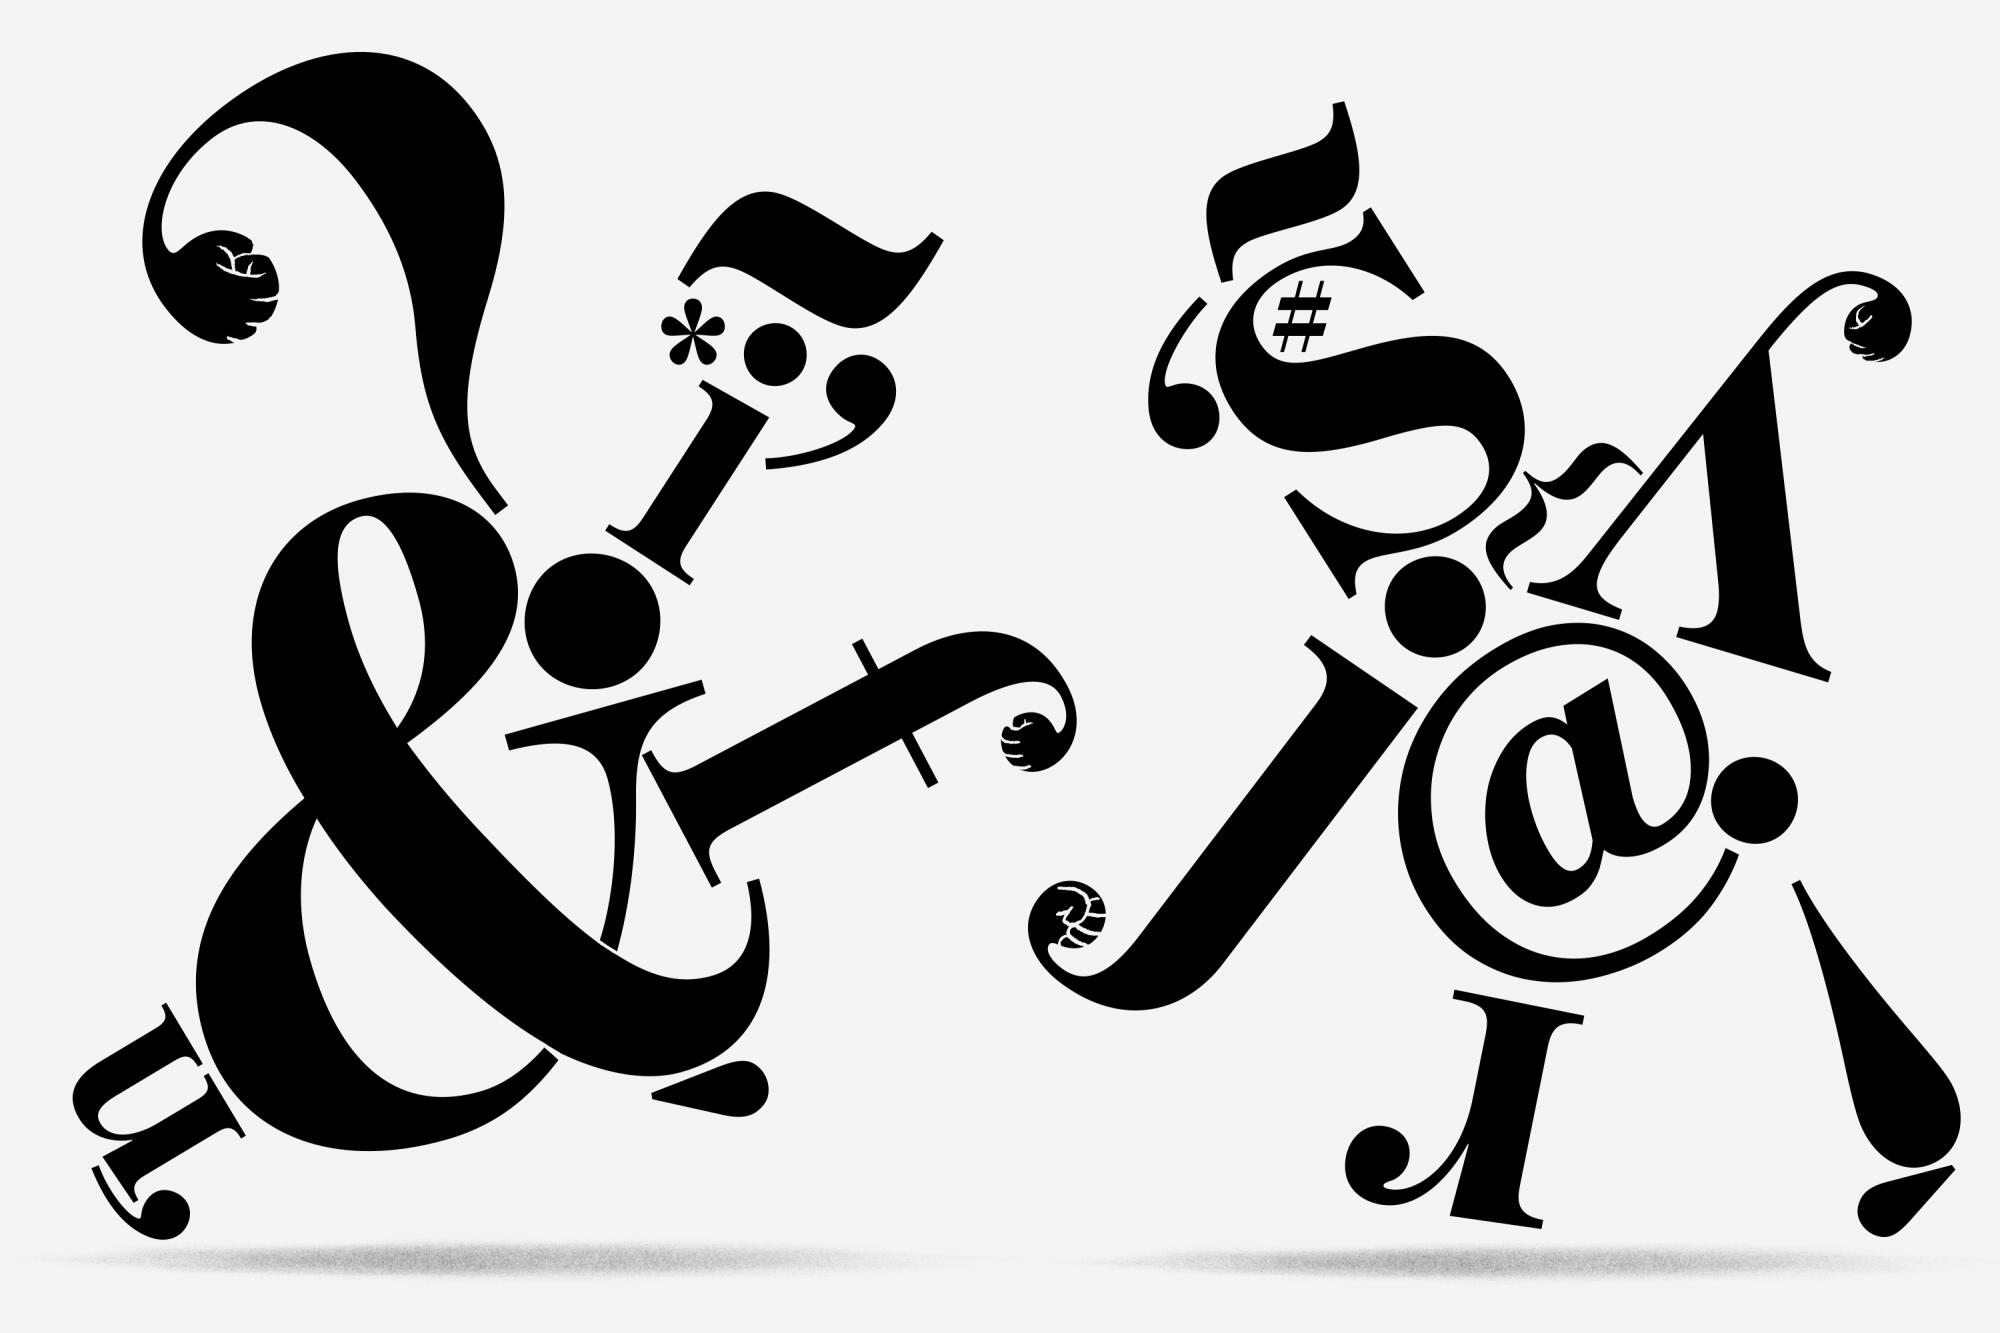 Illustration of two figures formed by typographic elements arguing.